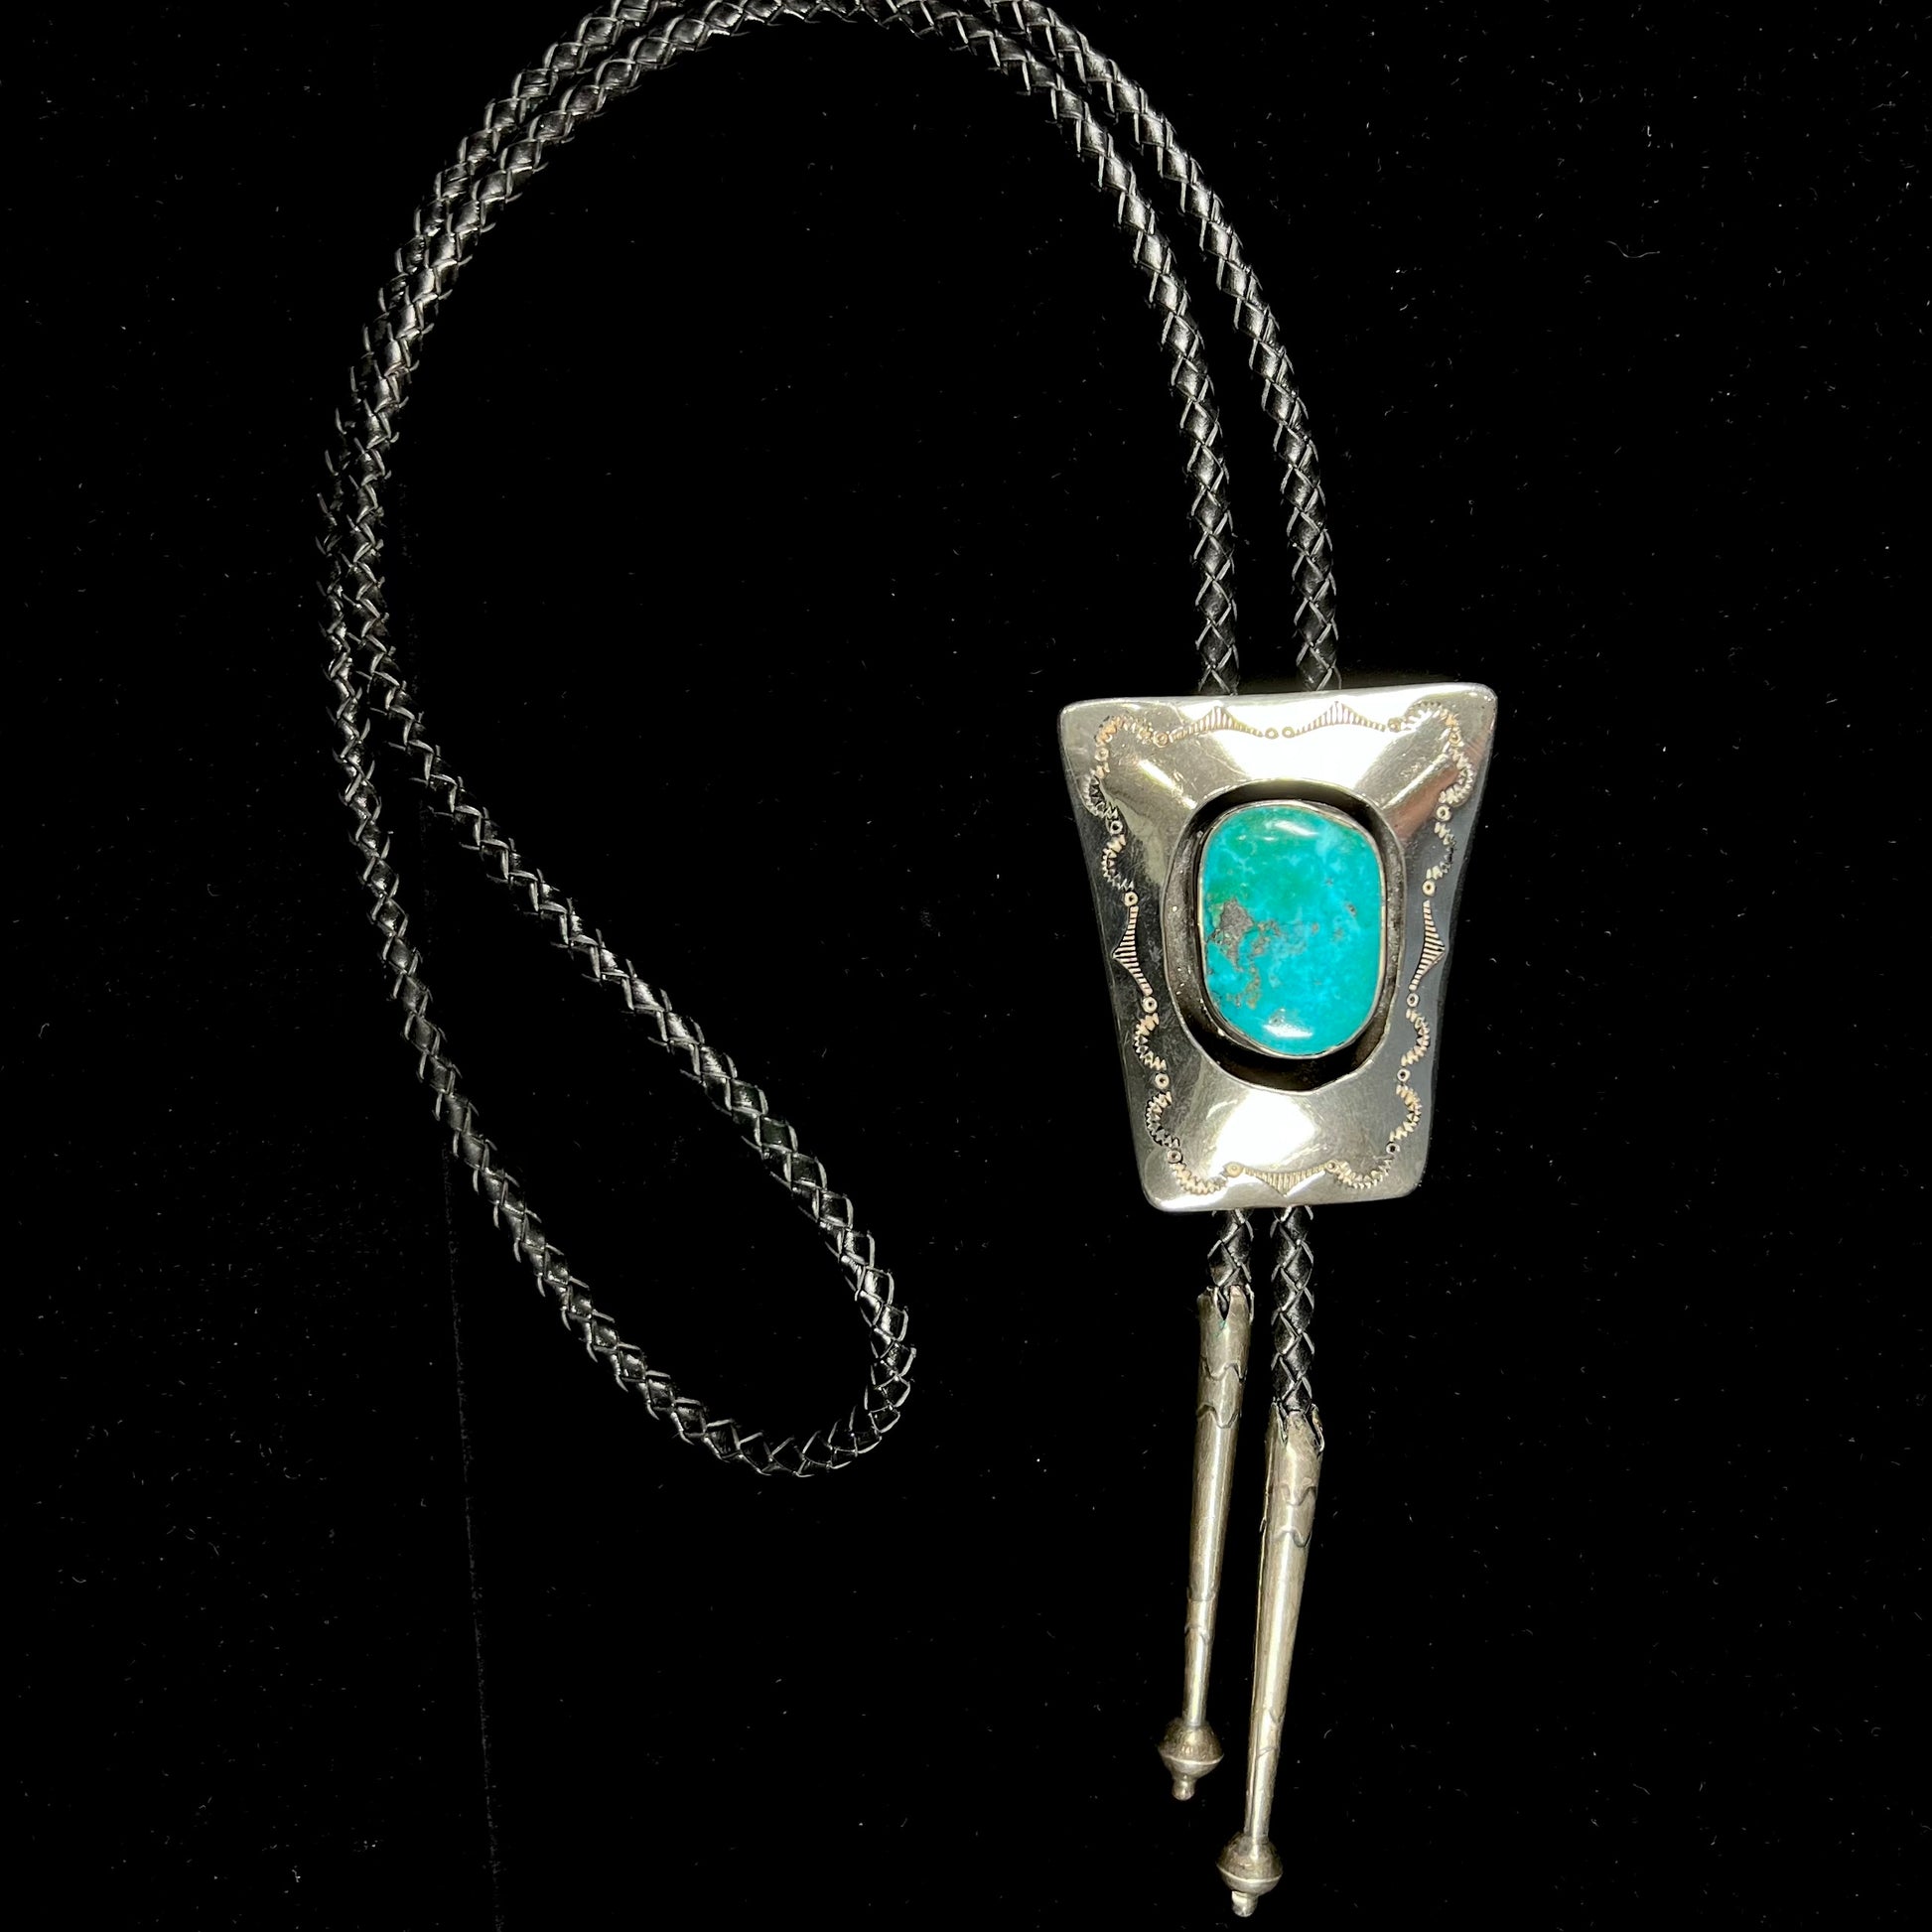 A vintage sterling silver Navajo bolo tie set with Morenci turquoise, handmade by artist Delvin Nelson.